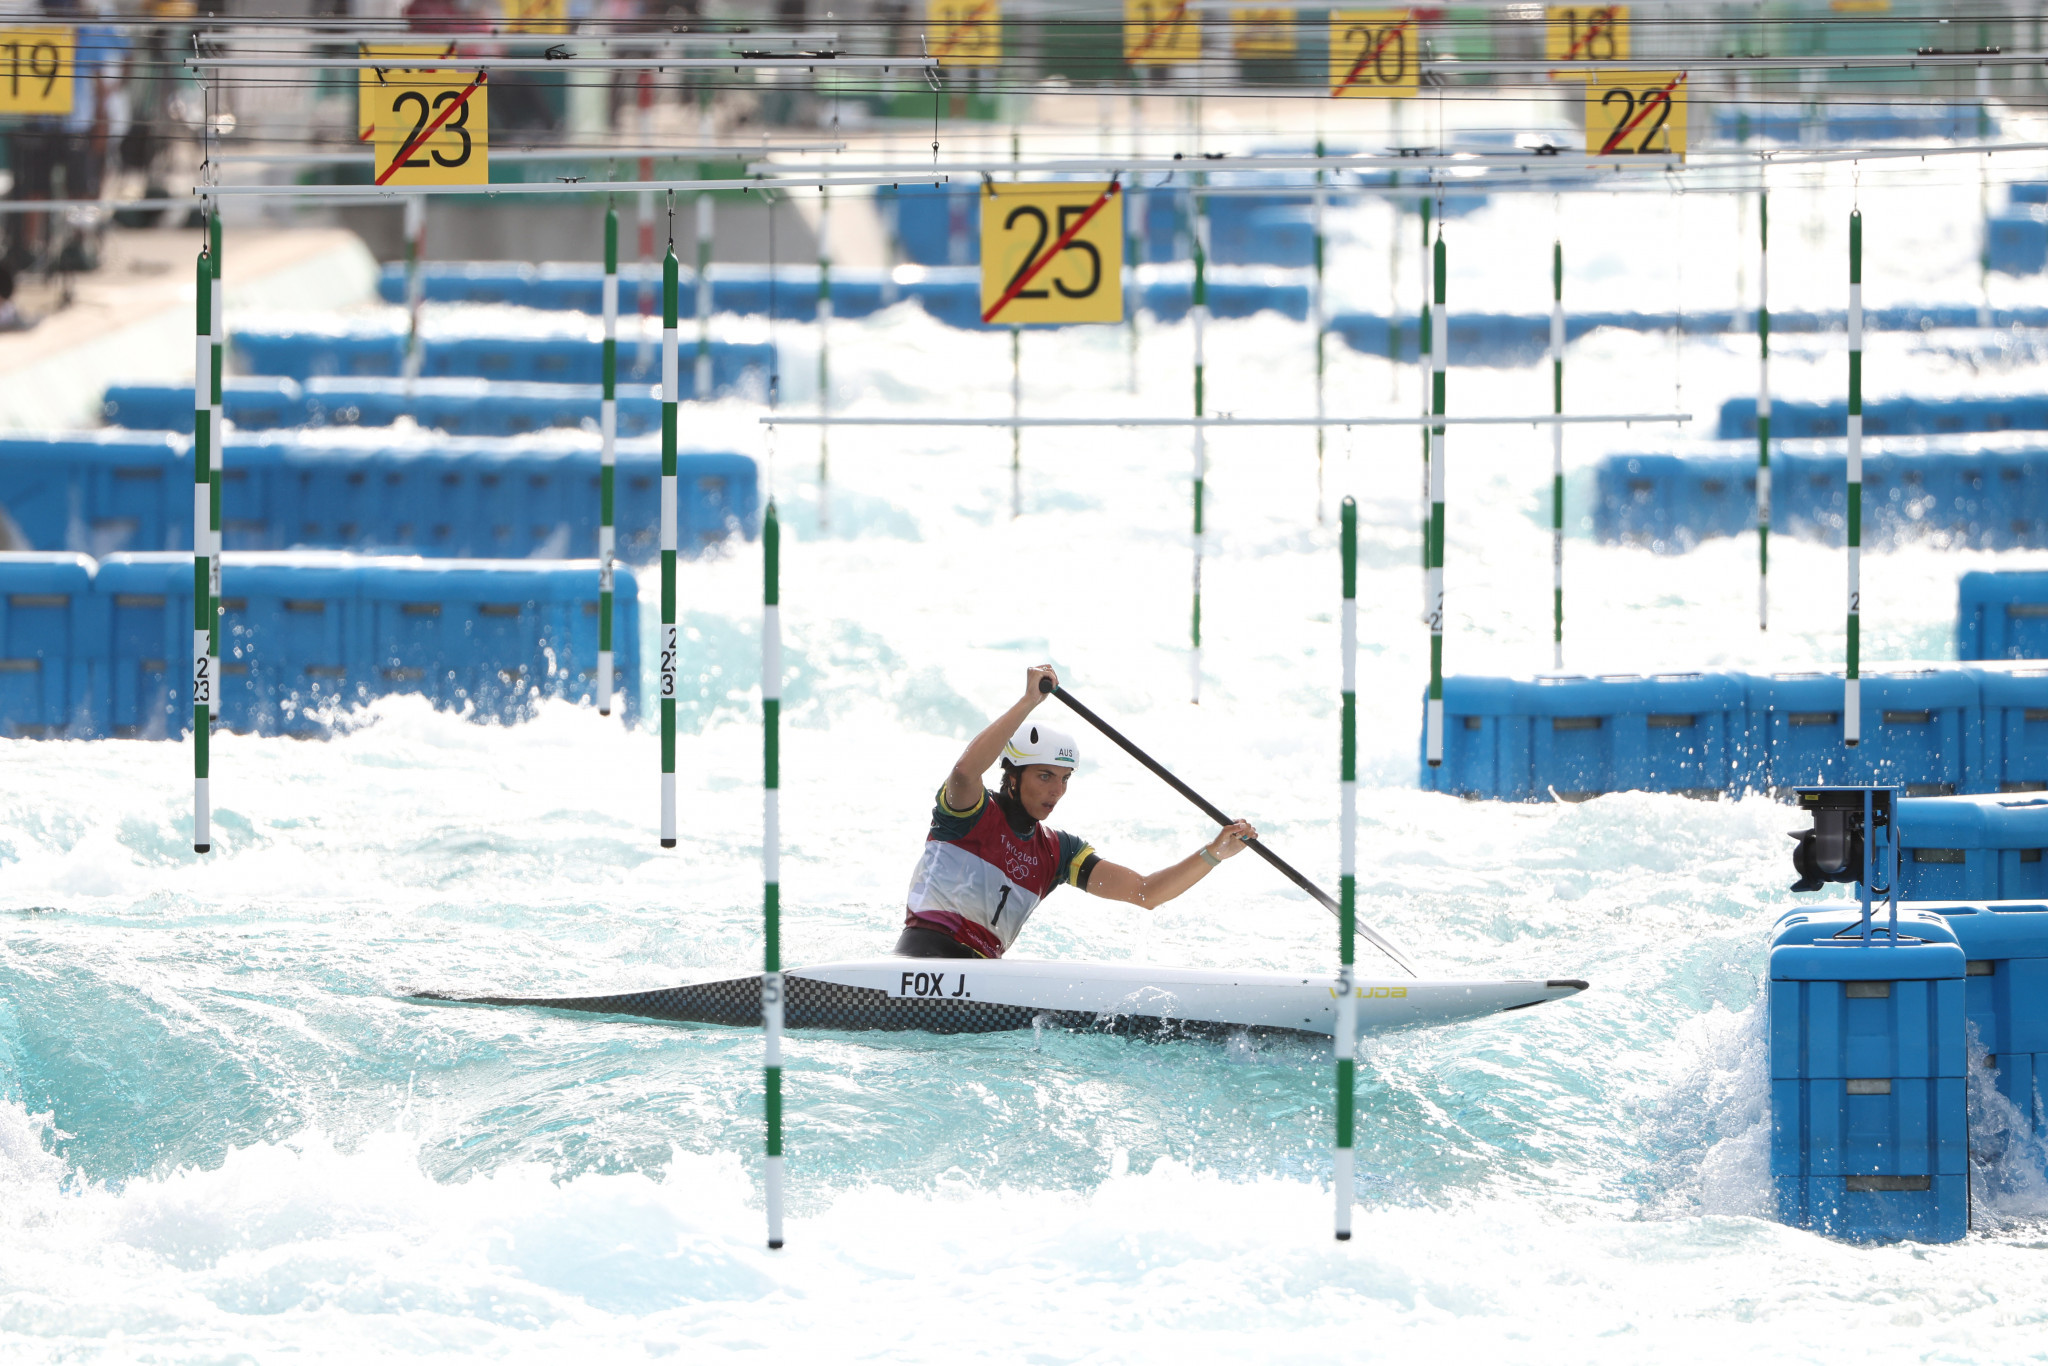 The Los Angeles 2028 Organising Committee would have to acquire approval from the city Government to move the canoe slalom venue to Oklahoma ©Getty Images